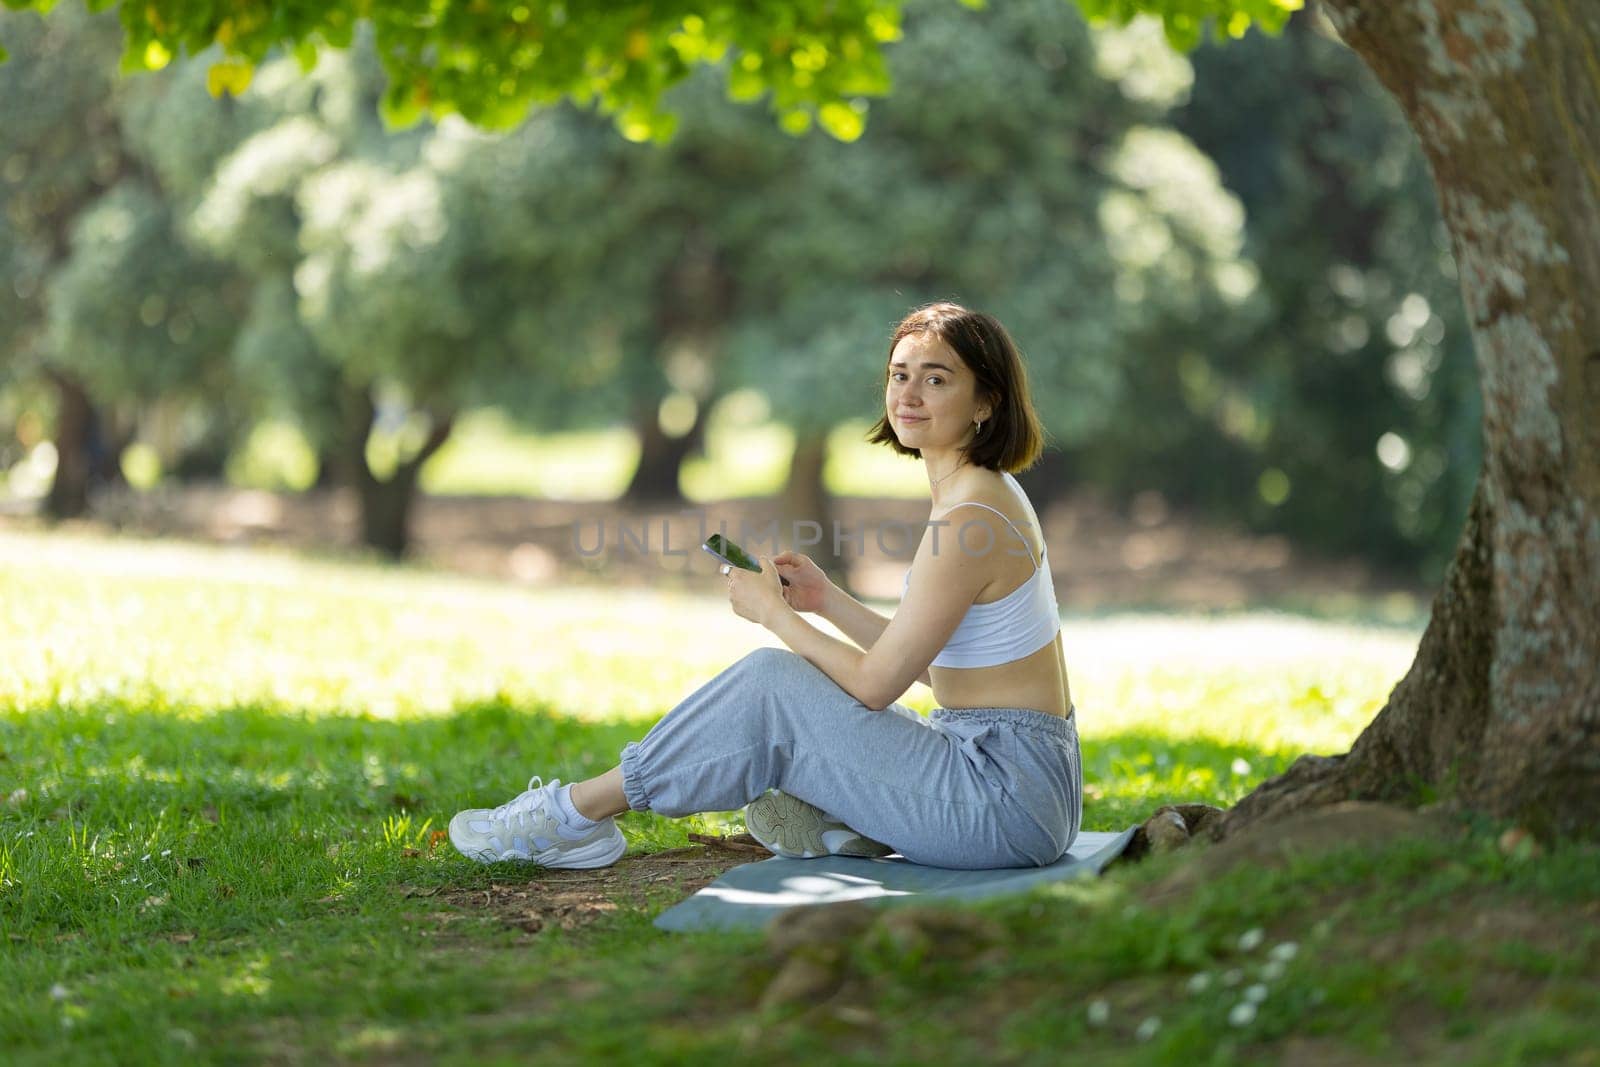 A sportive woman is sitting under a tree and use phone. She is wearing a white tank top and gray pants